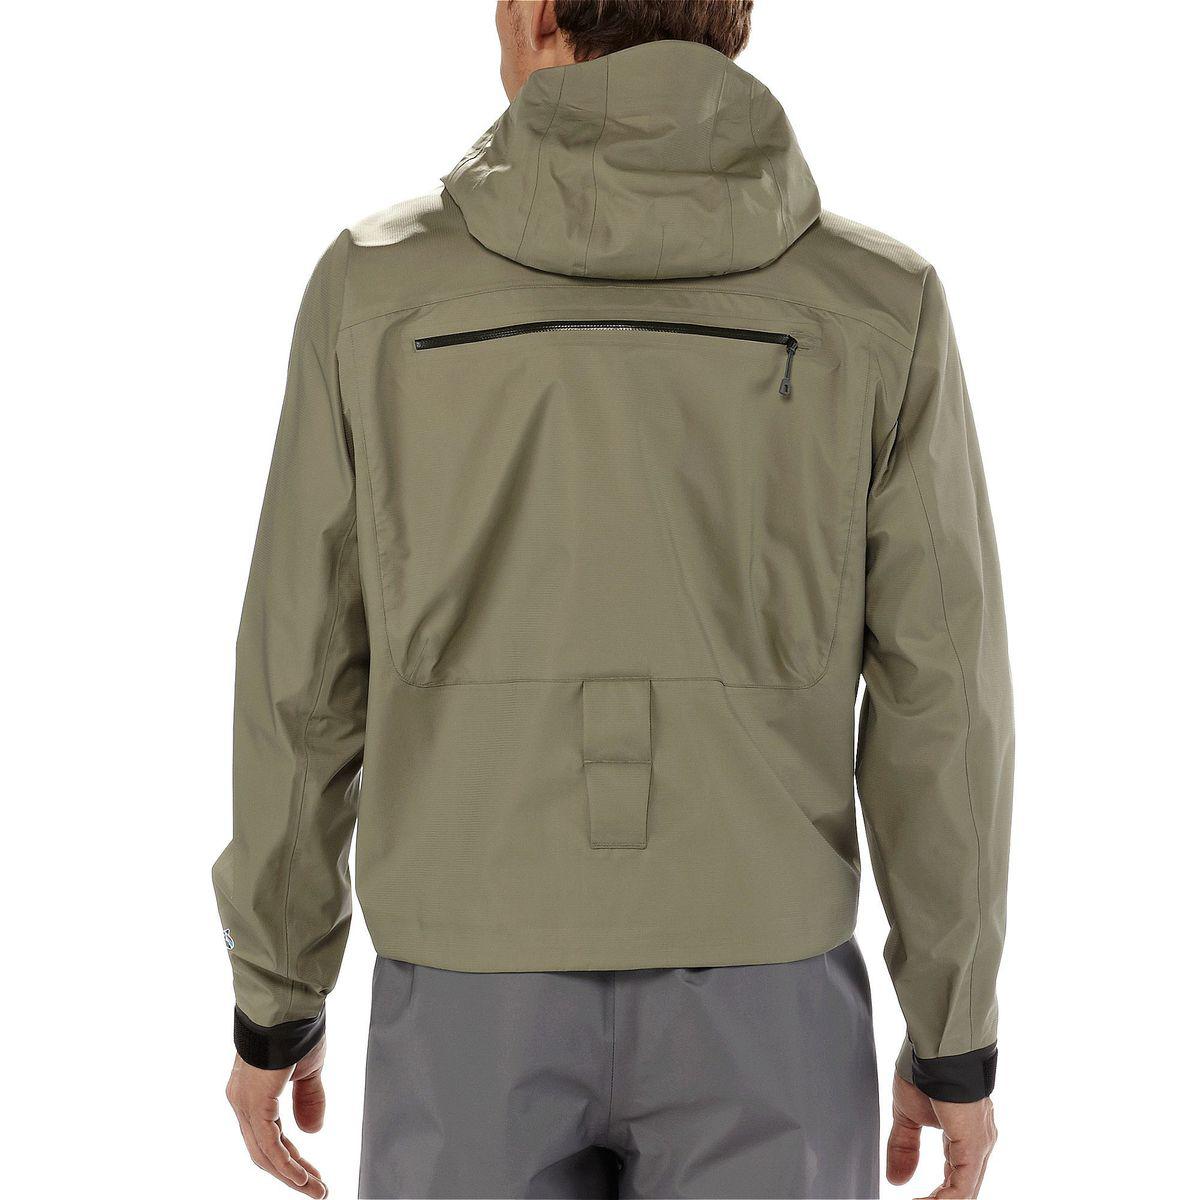 Patagonia Synthetic Sst Fishing Jacket in Green for Men - Lyst